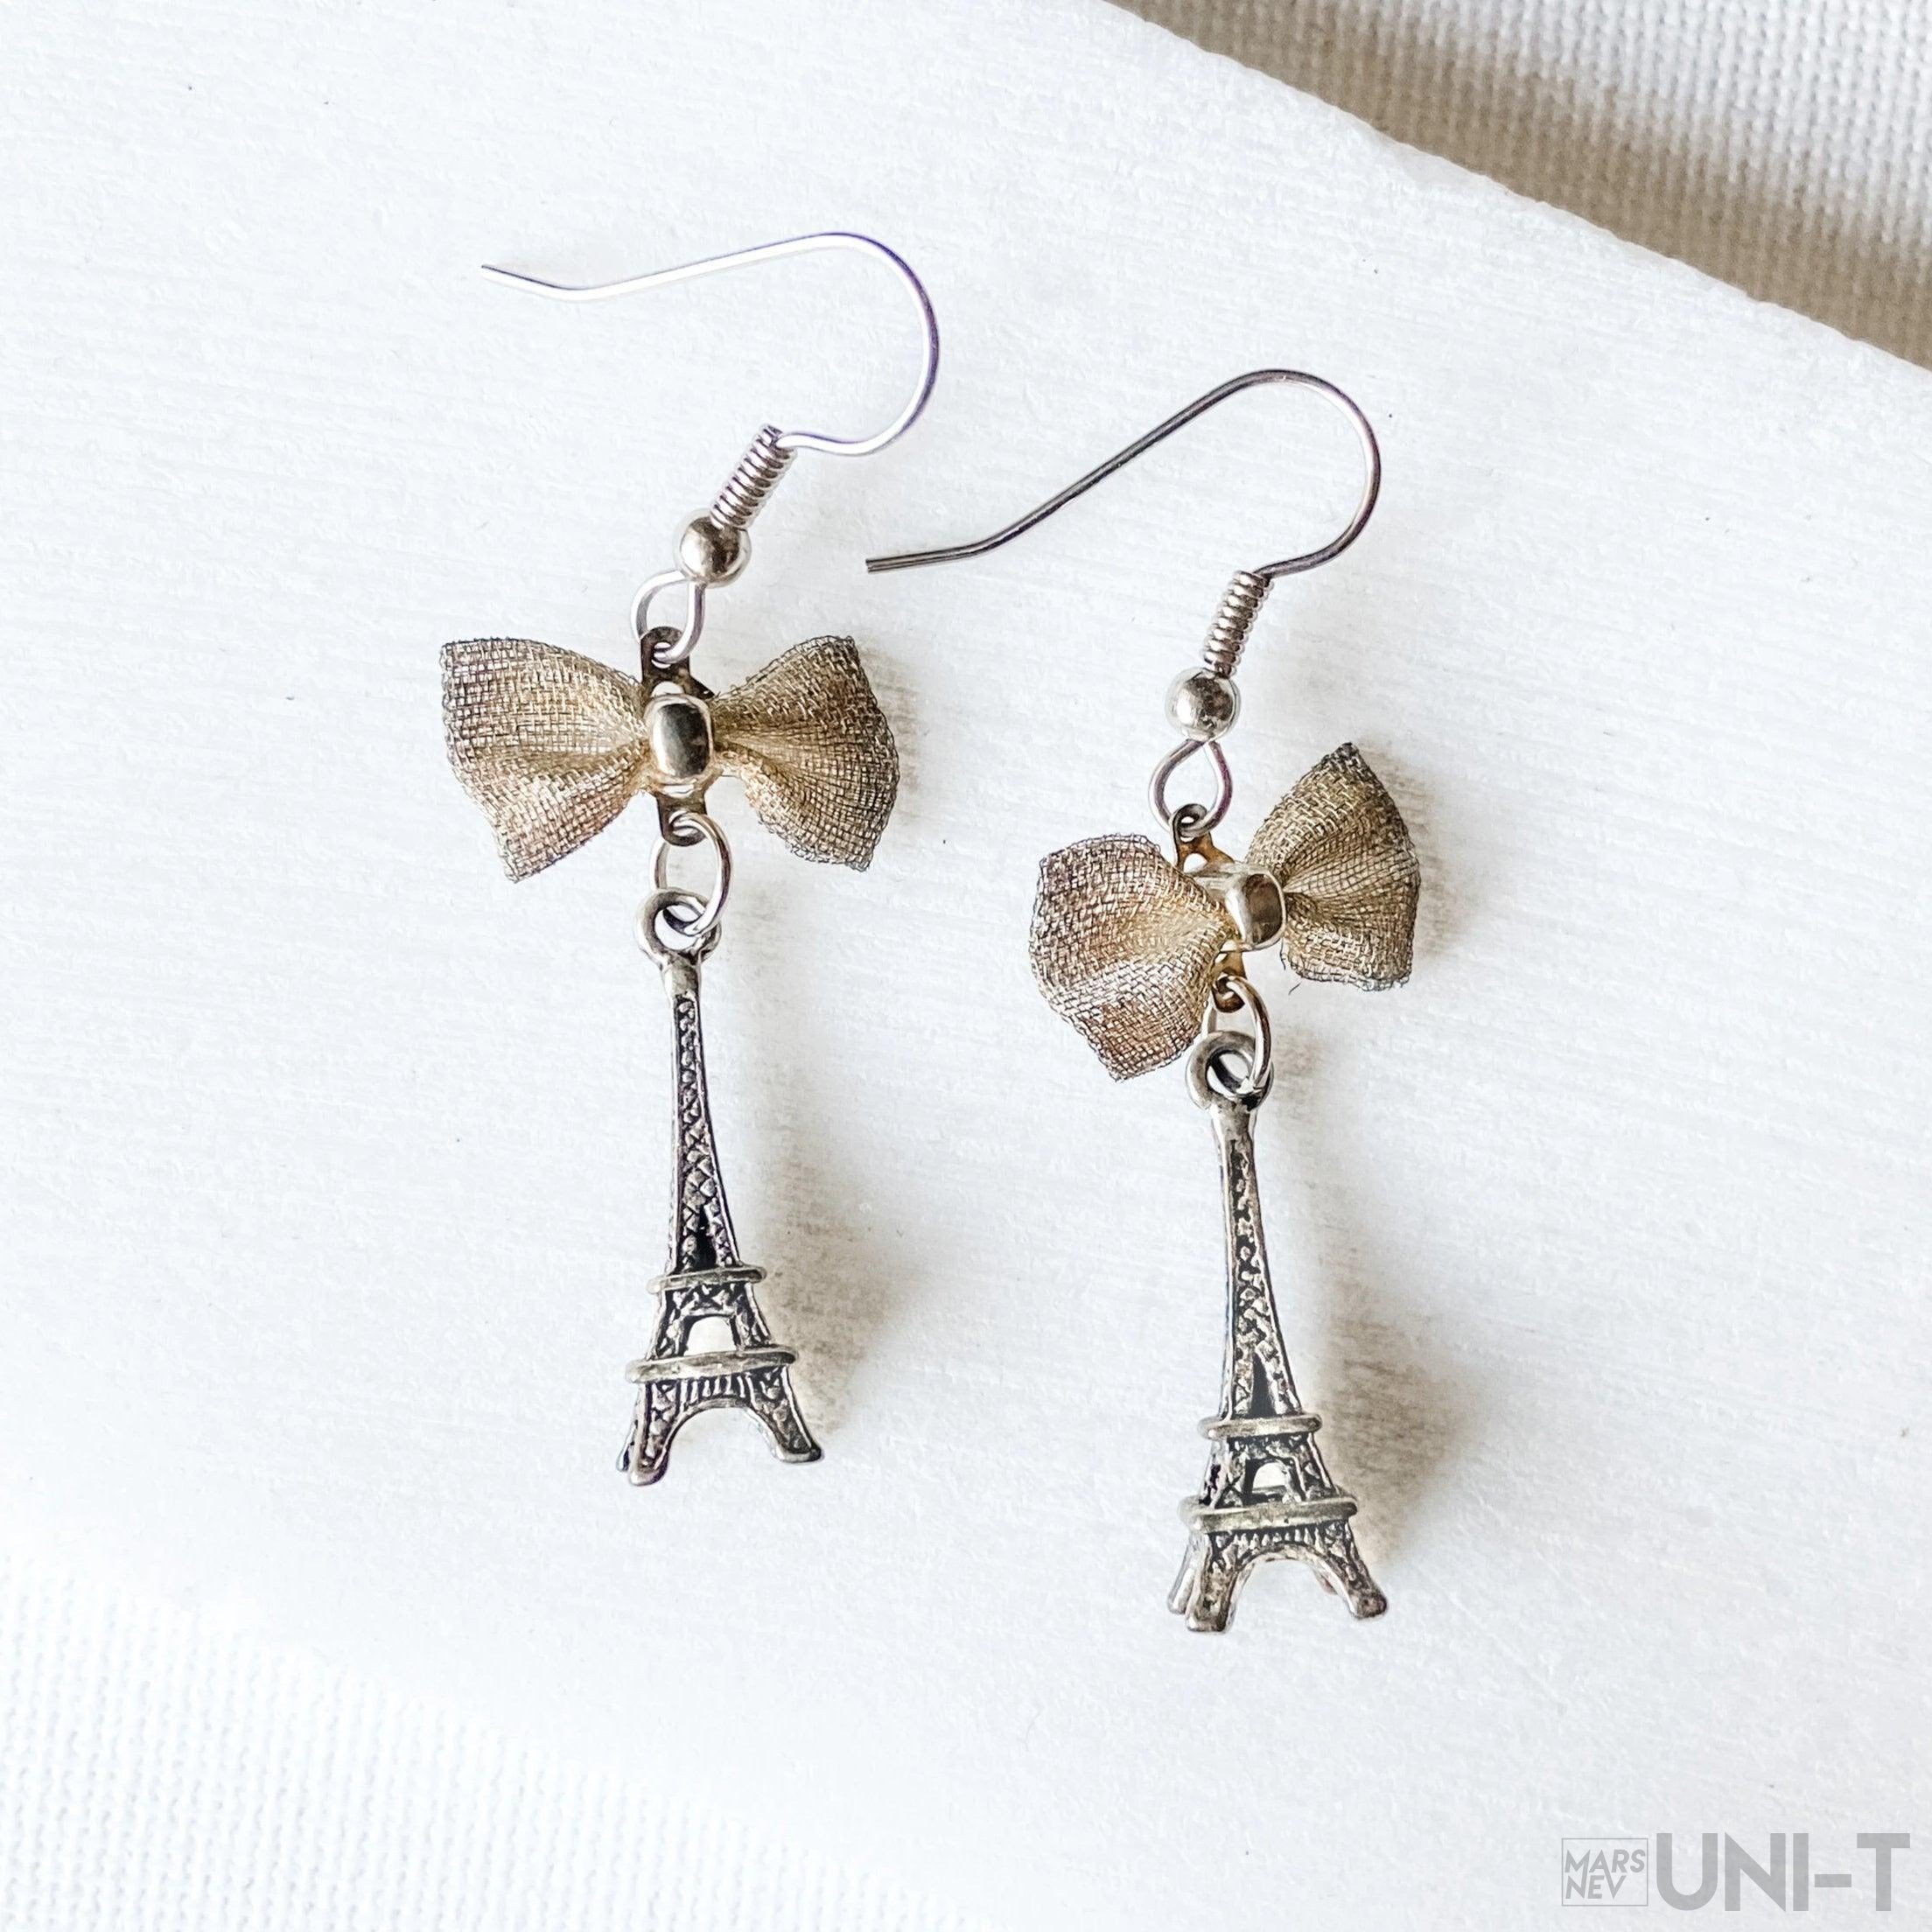 Eiffel Tower Charm Earrings with Bows Uni-T